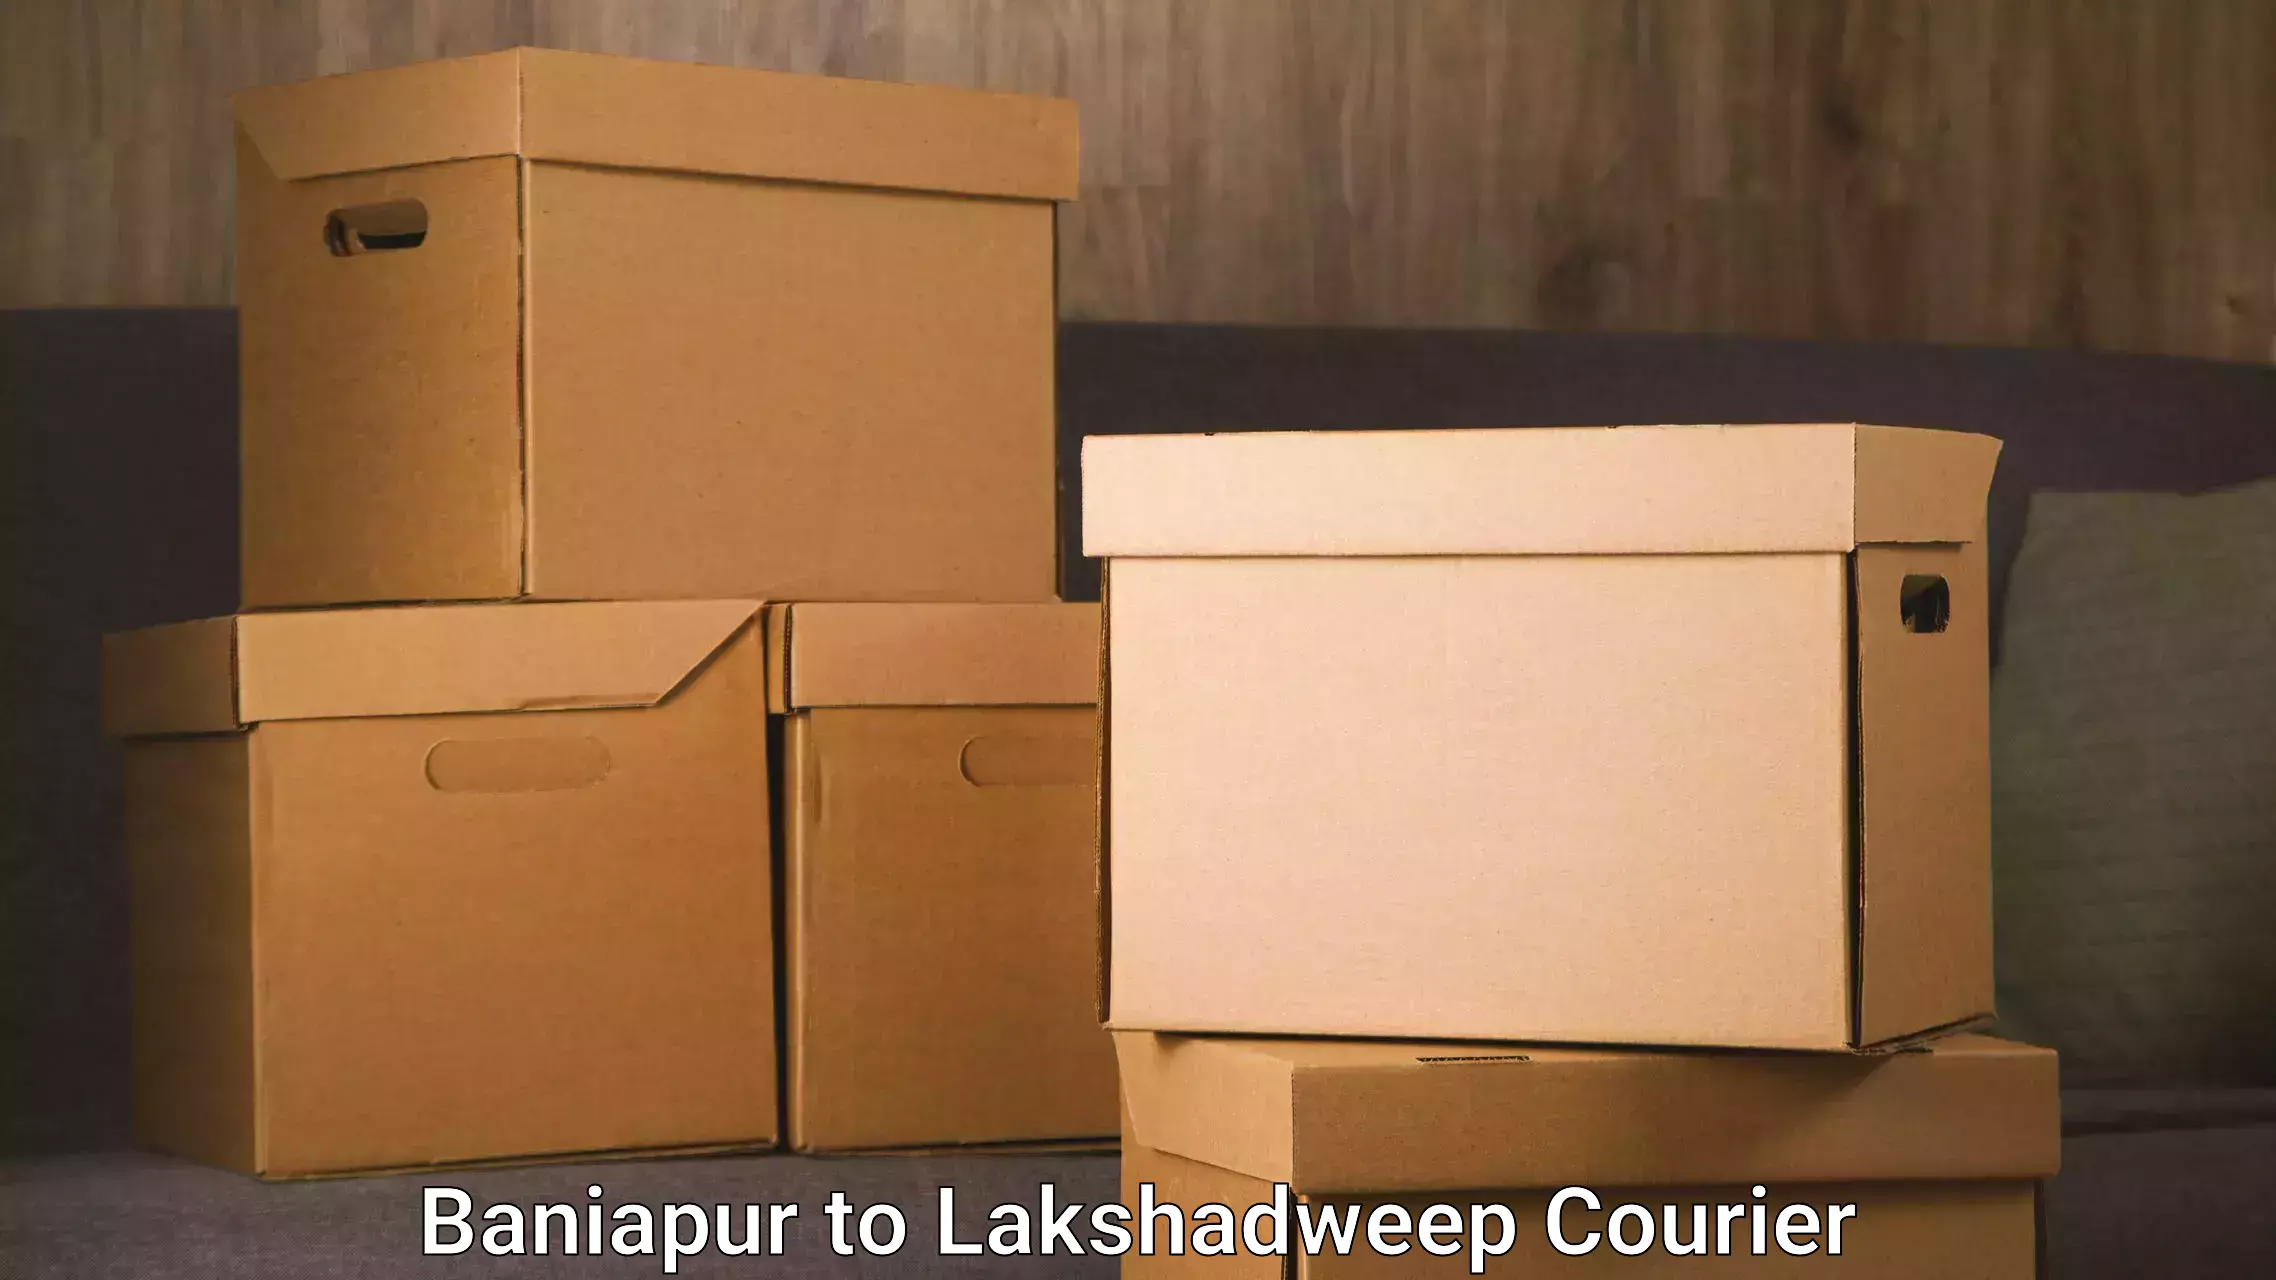 Trusted relocation experts Baniapur to Lakshadweep